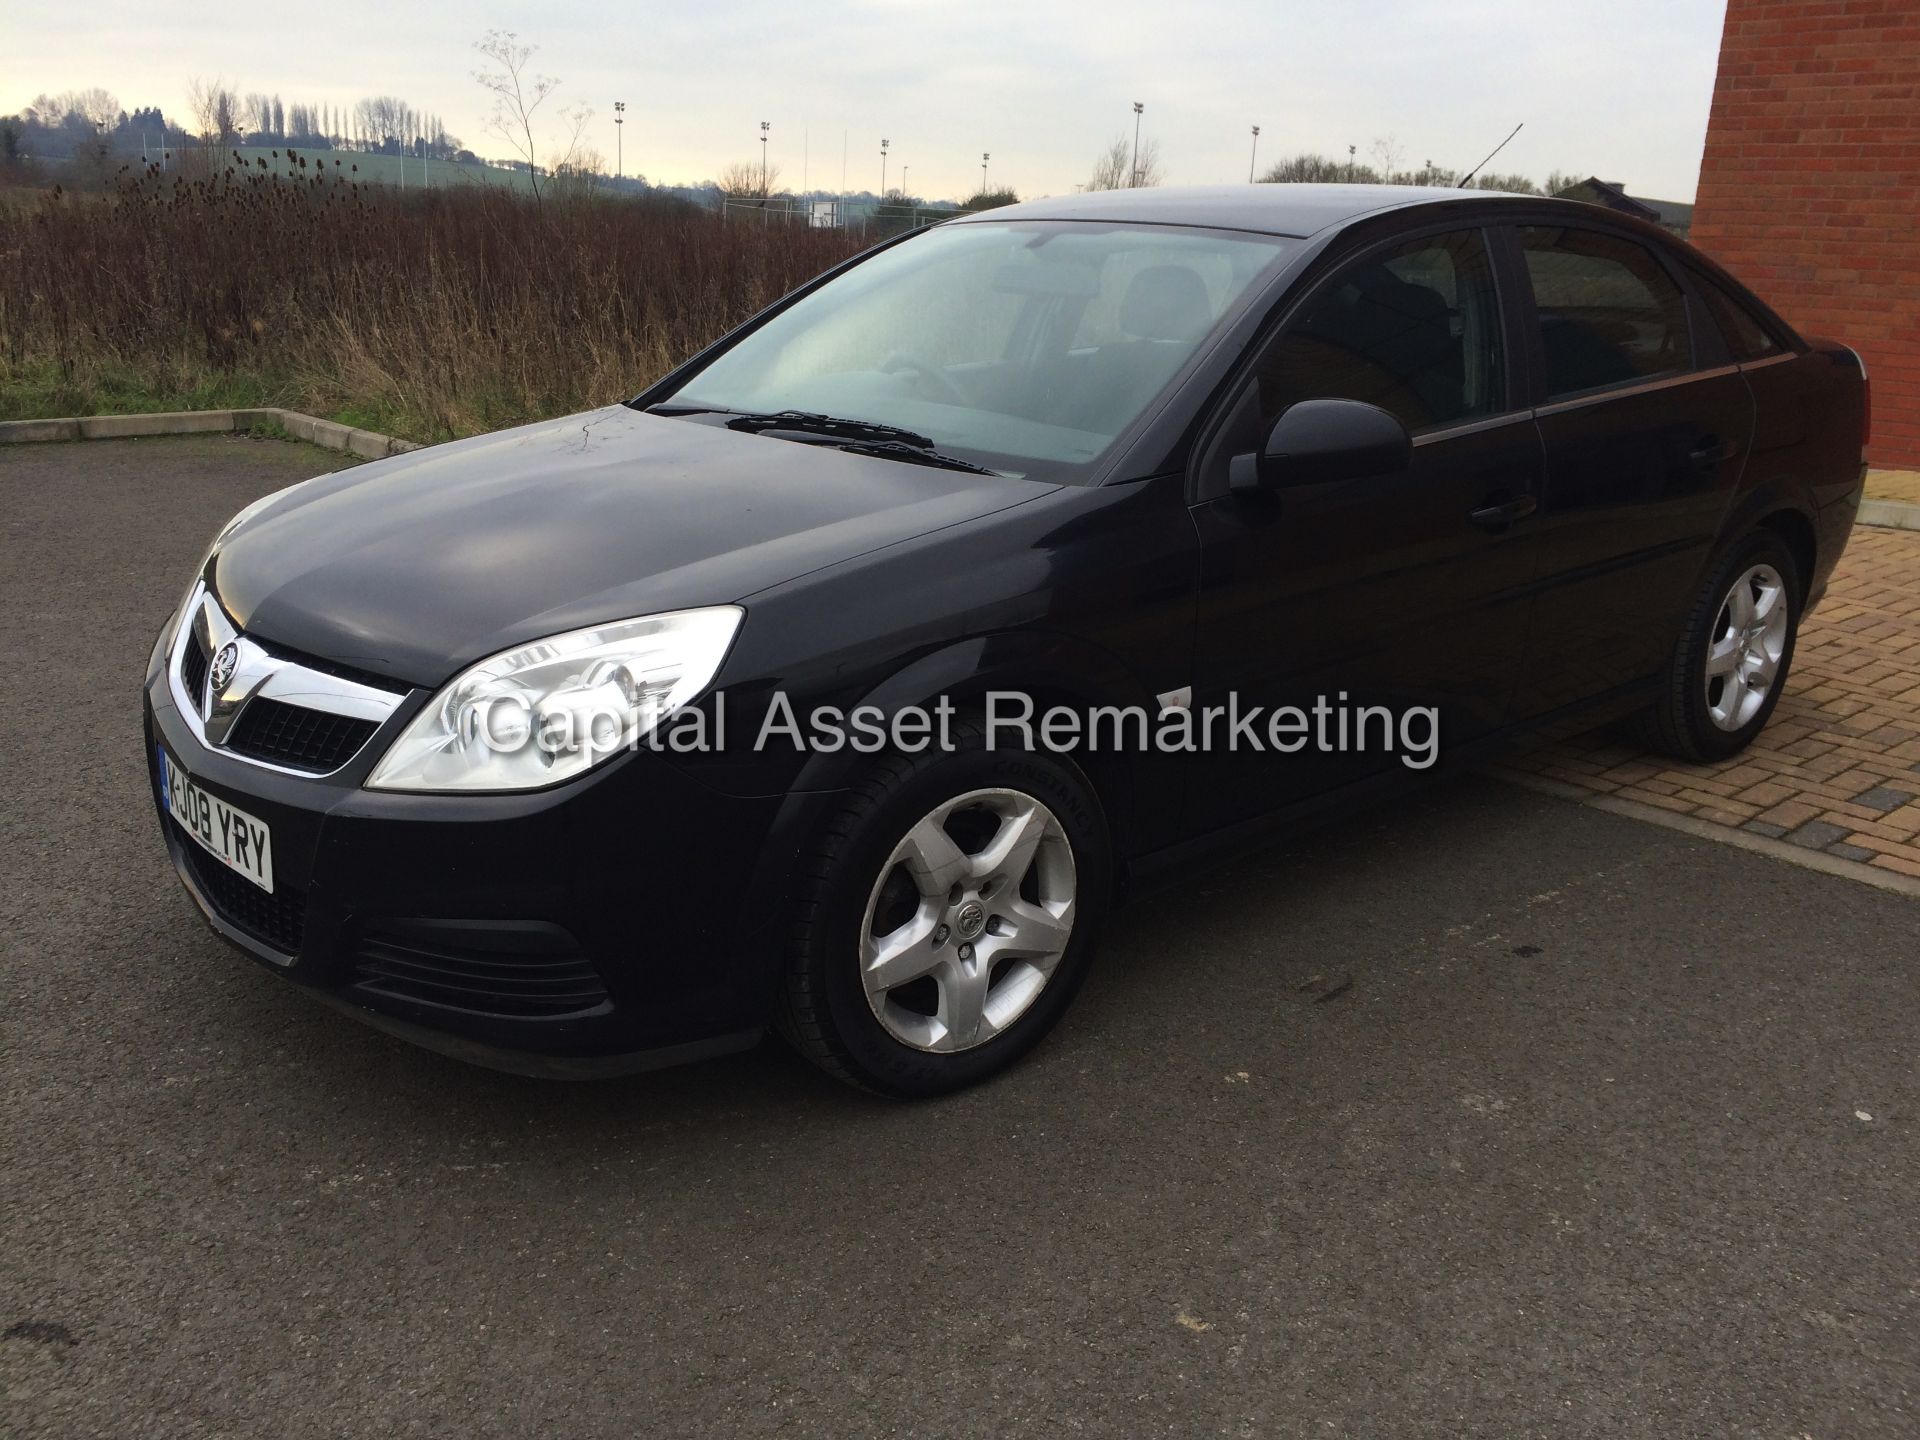 (On Sale) VAUXHALL VECTRA 1.9CDTI '150' 6 SPEED (2008 - 08 REG) AIR CON - ELEC PACK - NO VAT - Image 3 of 23